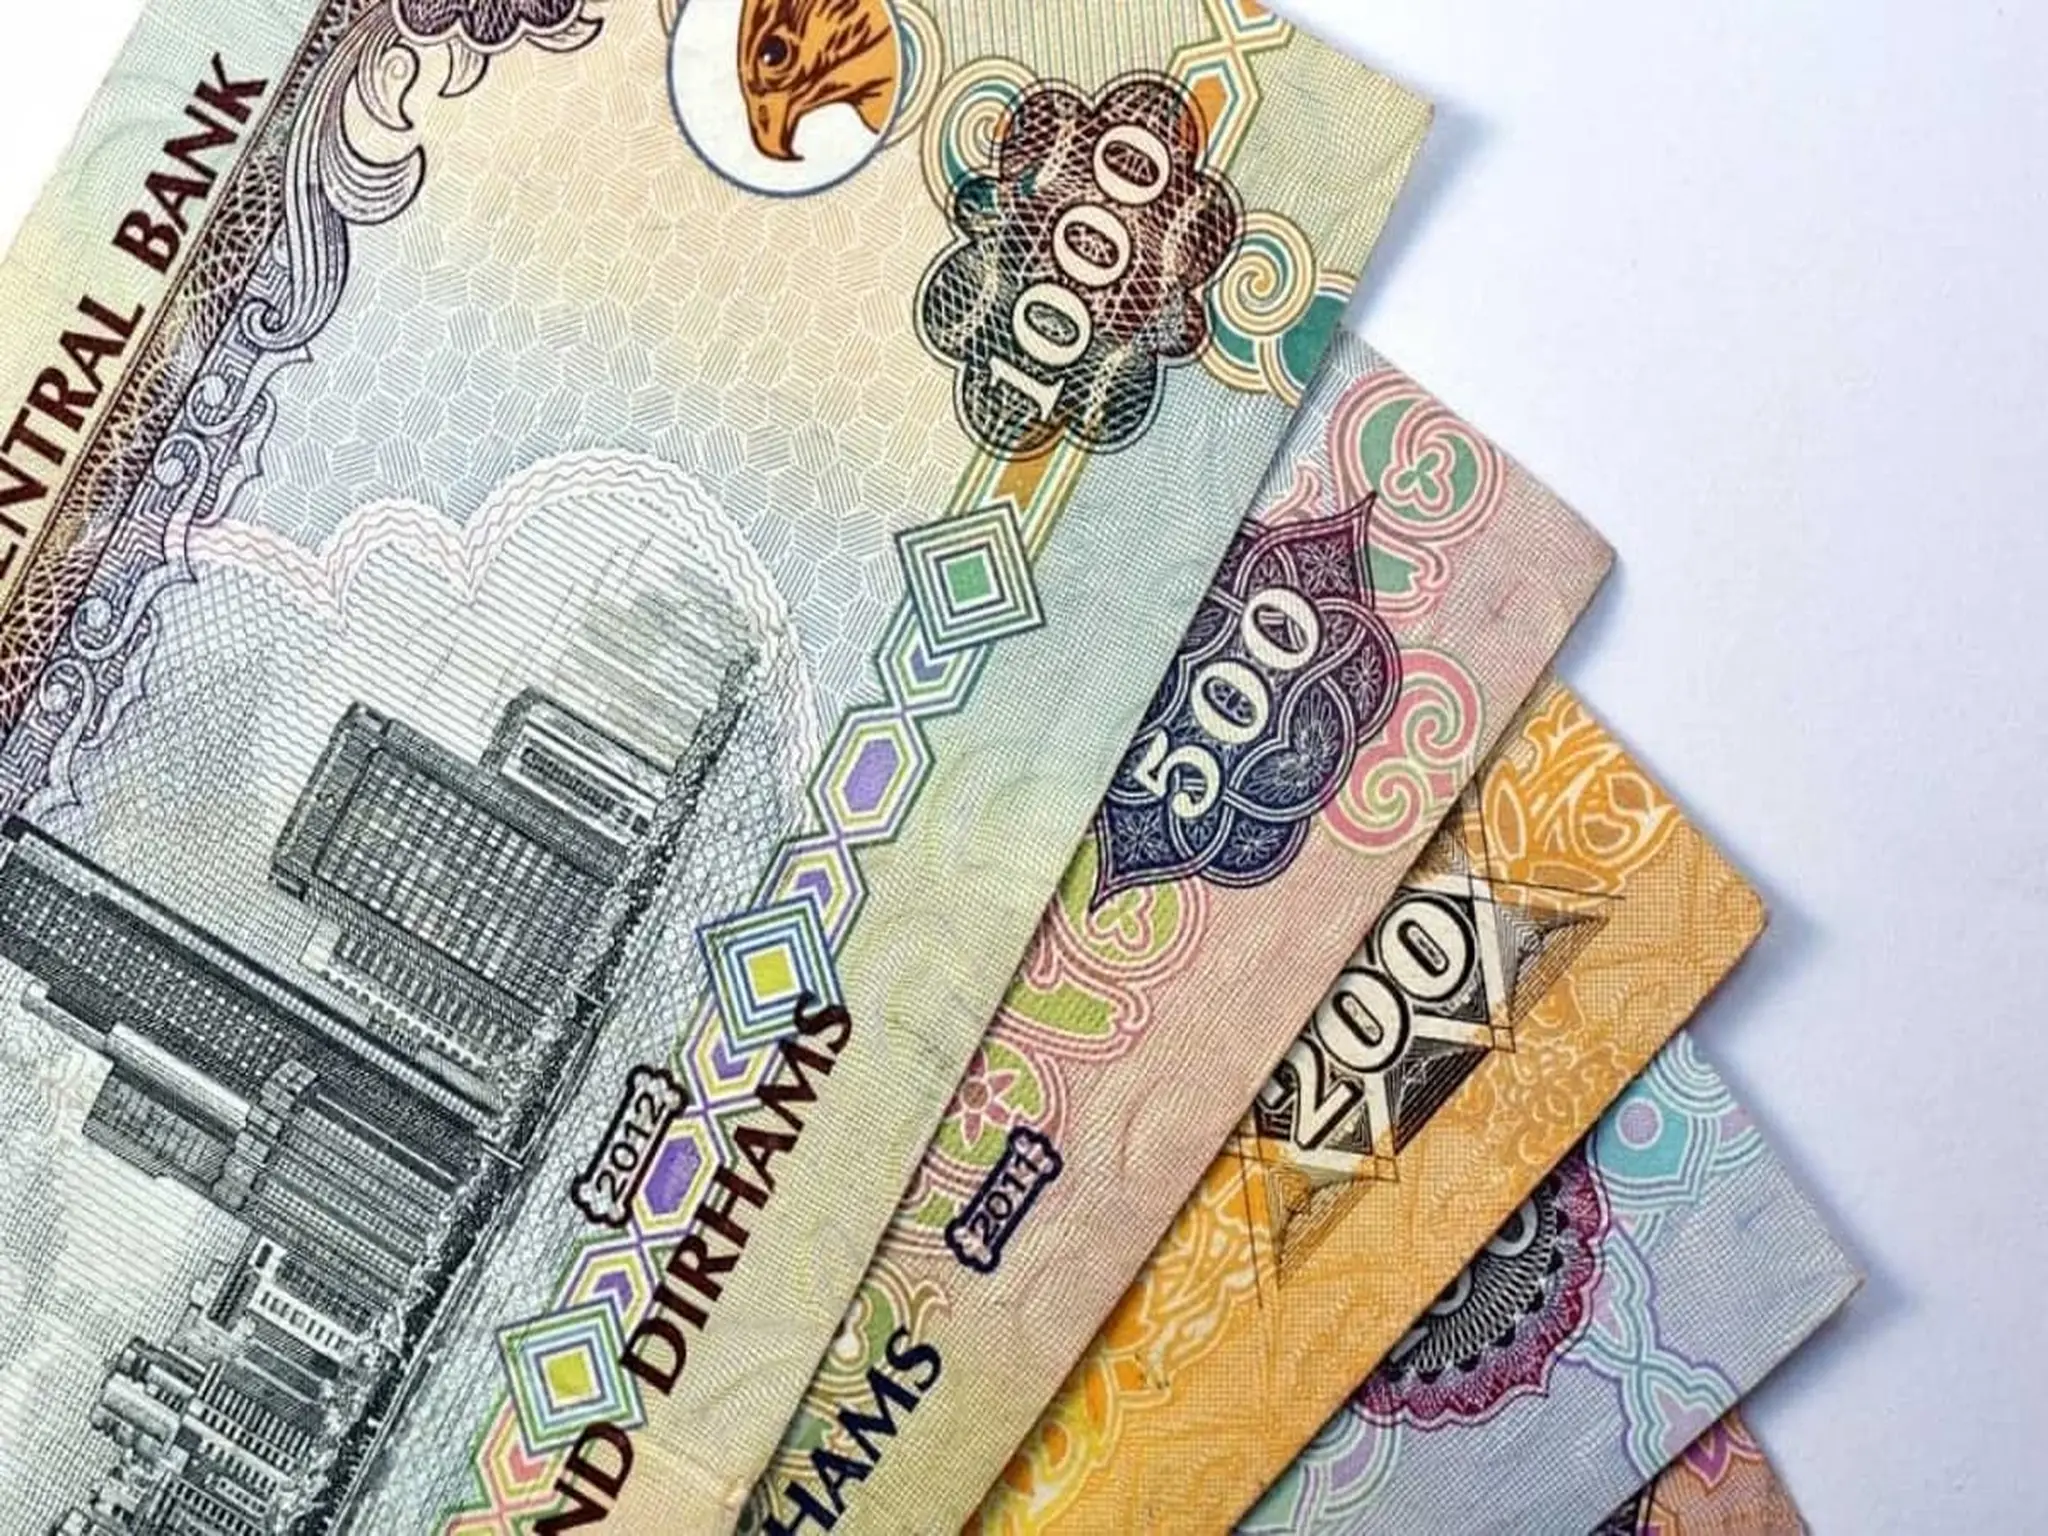 UAE issues a new fine of up to 200 thousand dirhams